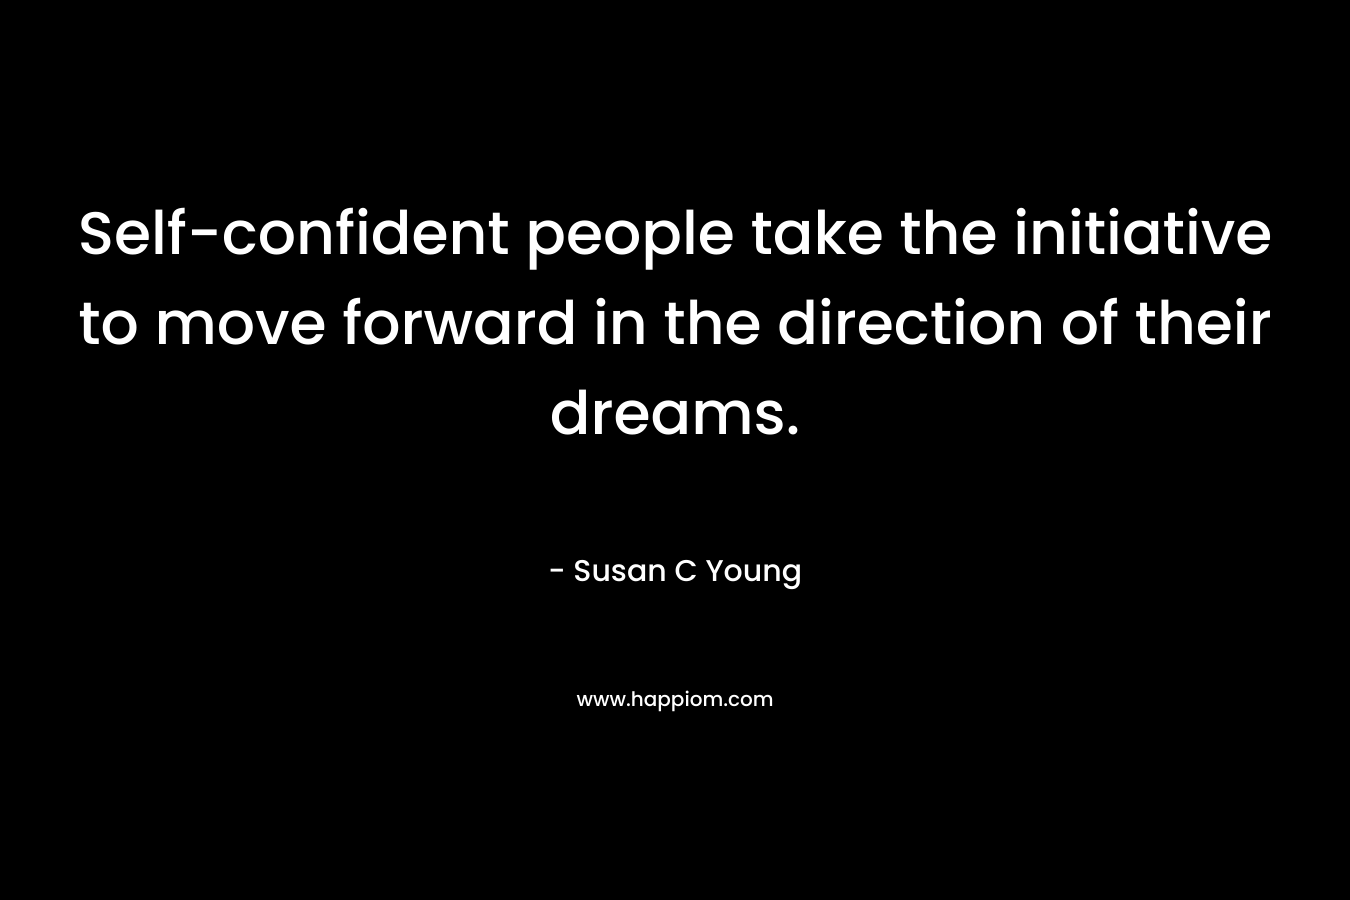 Self-confident people take the initiative to move forward in the direction of their dreams.